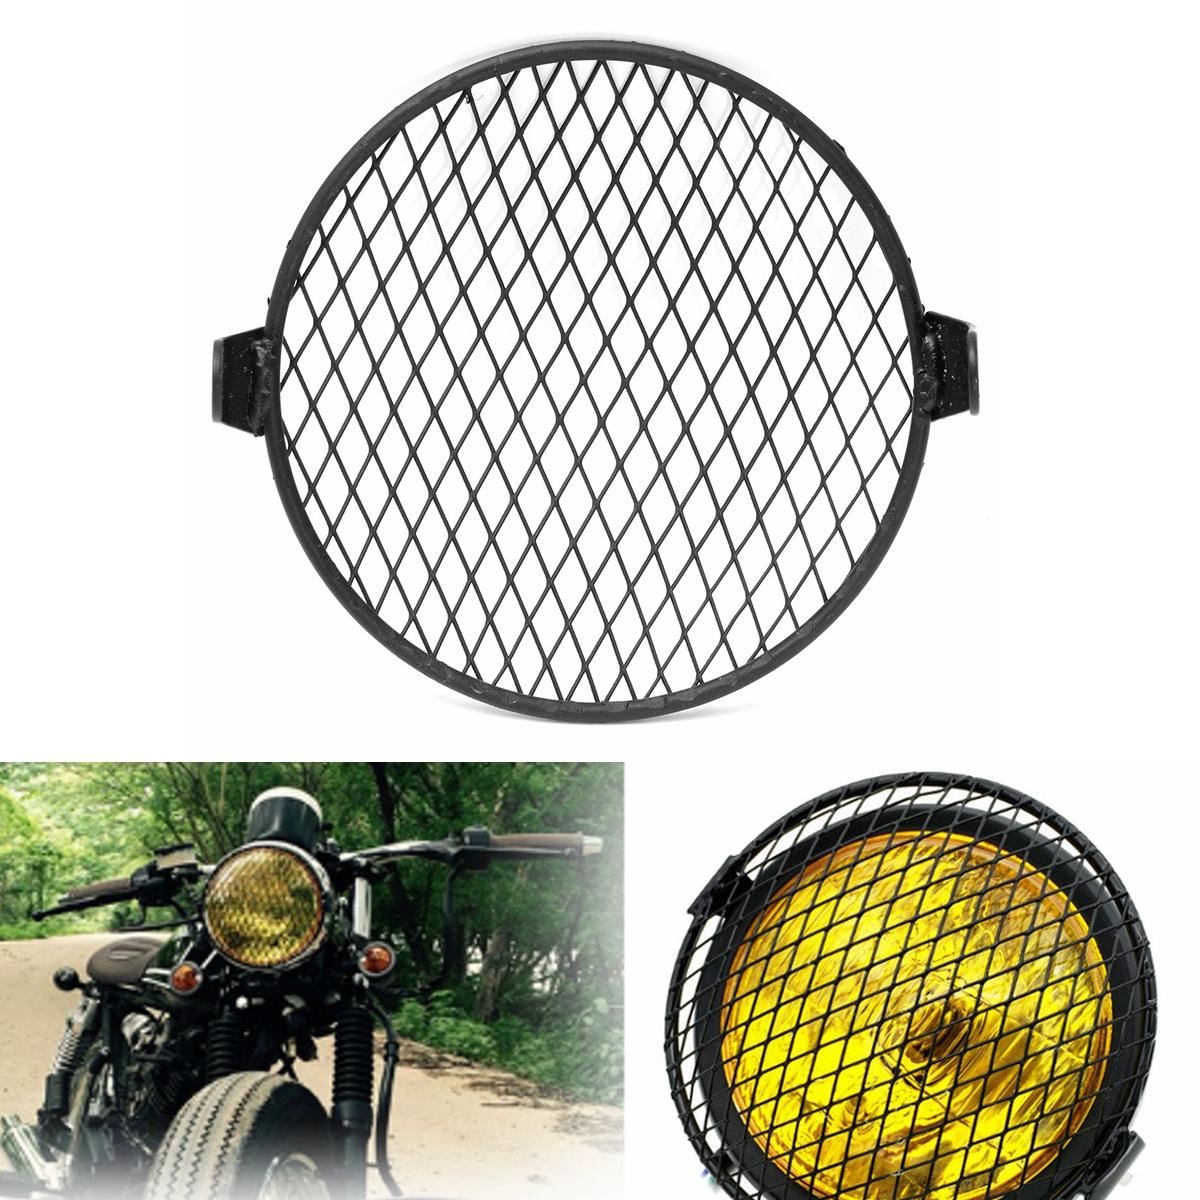 Retro Motorcycle Headlight Mask Cover Grill Round